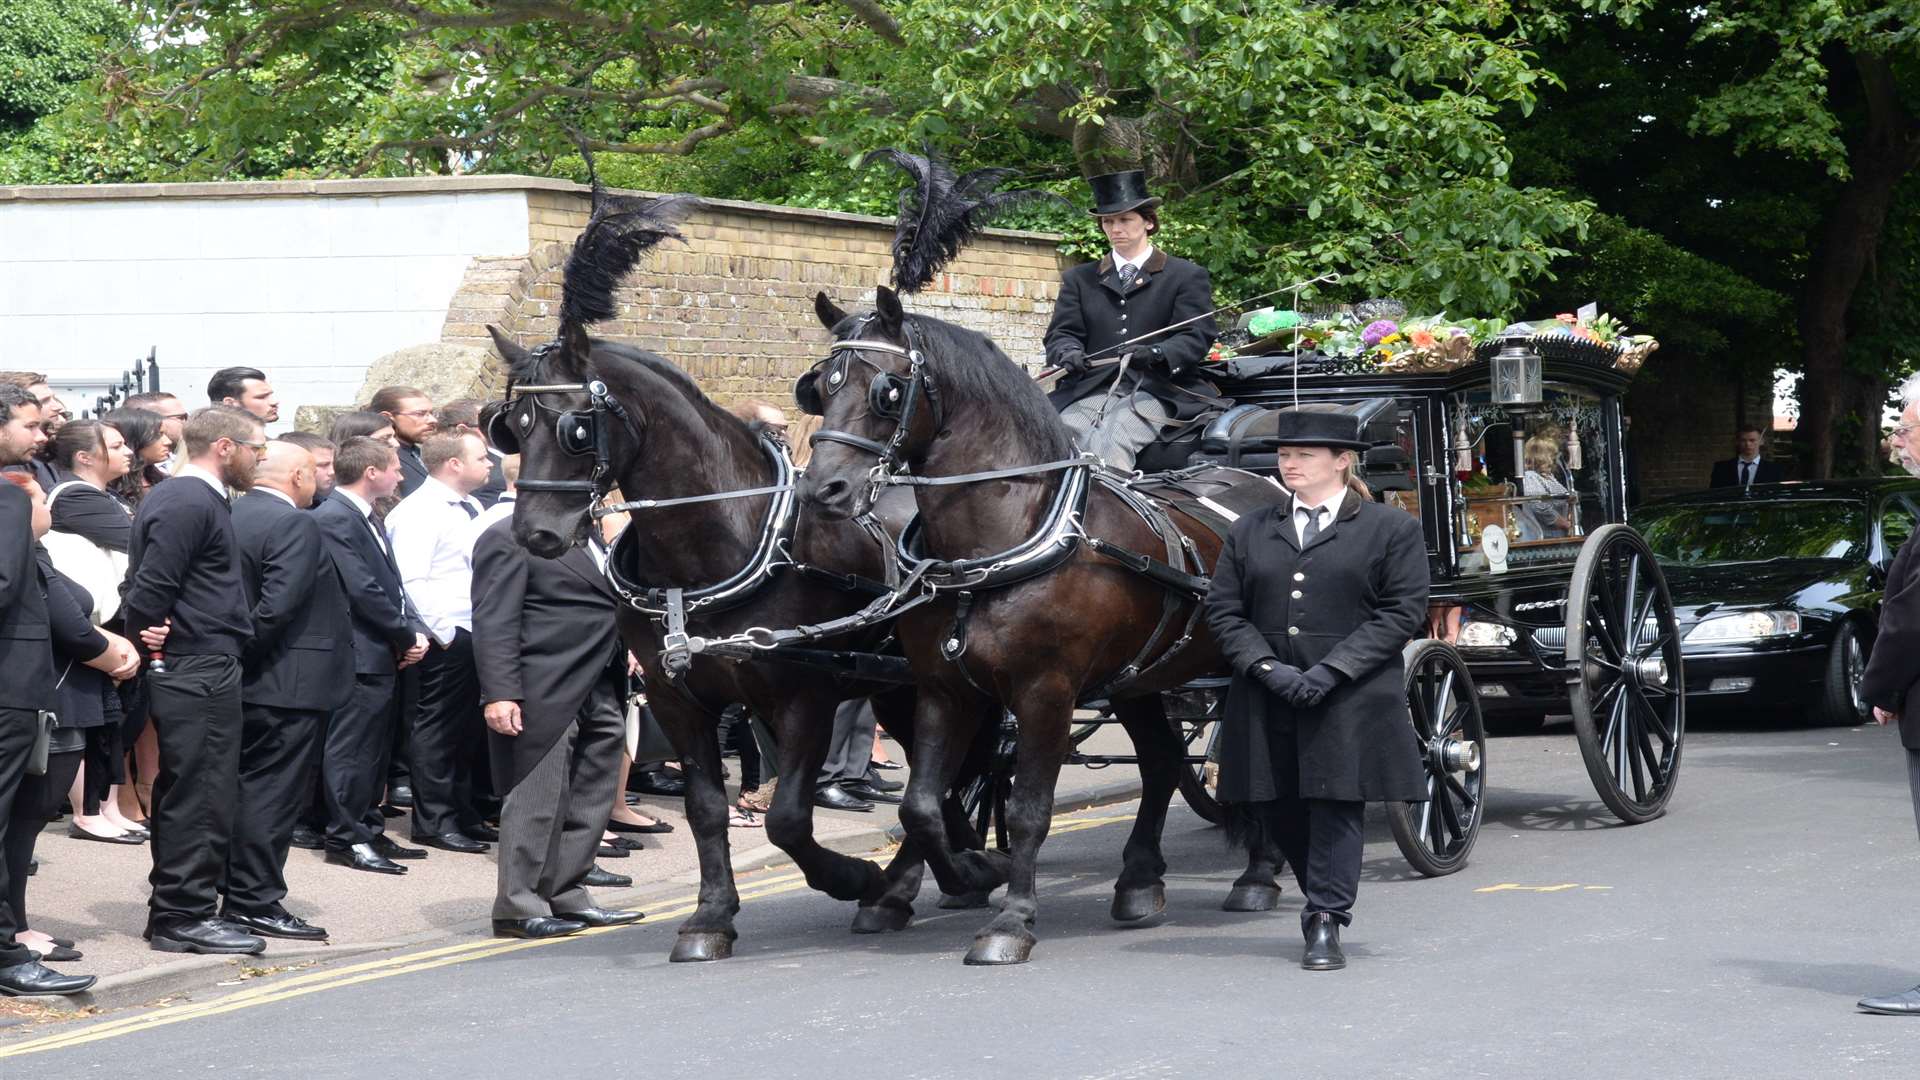 Jordan Lupton was brought to the Our Lady of the Sacred Heart church in Herne Bay in a horse drawn carriage